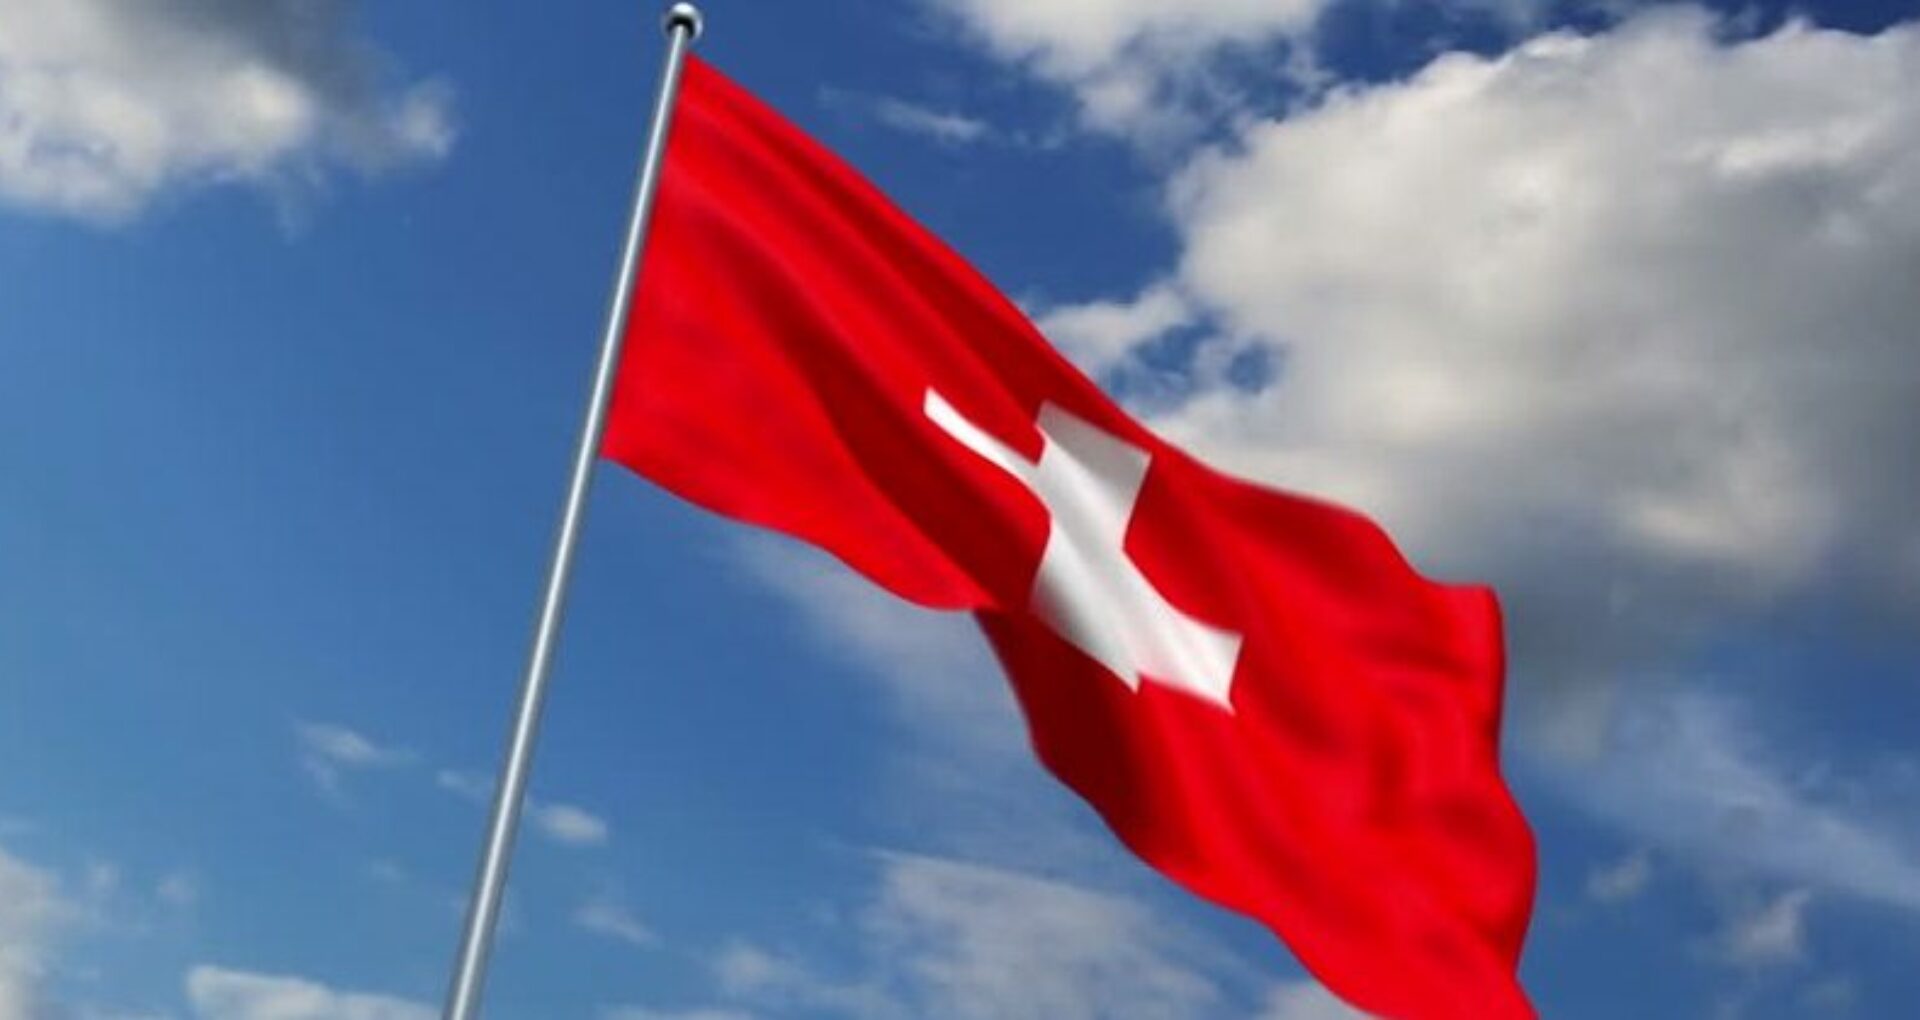 Embassy of Switzerland: We salute the parliamentary elections and Parliament’s decision must be respected